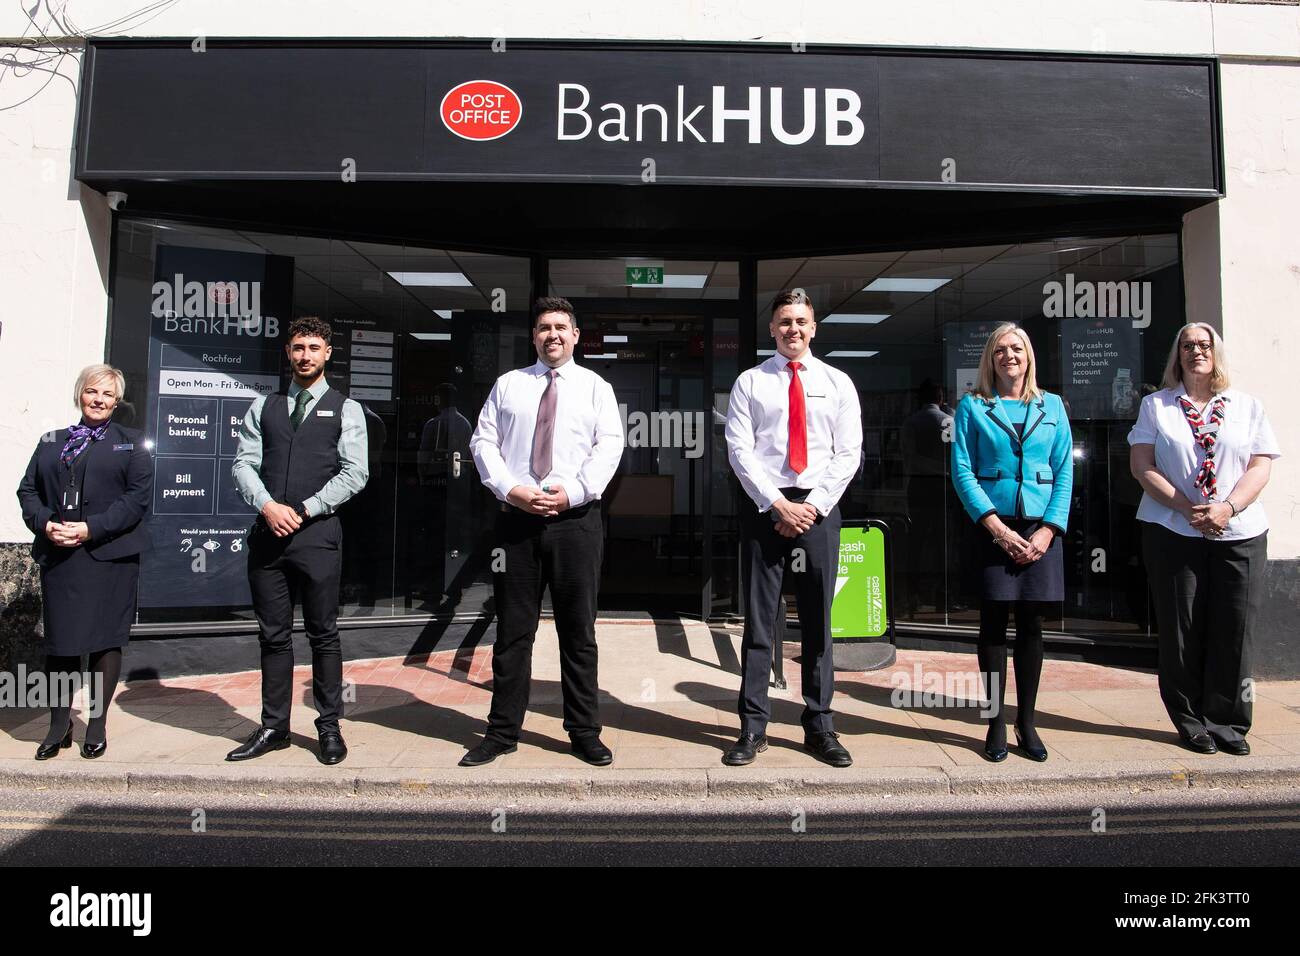 EDITORIAL USE ONLY (Left to right) Toni Jean Bapiste, NatWest Community Banker, David Szczapaniak, Lloyds Bank Community Banker, Richard Fleetwood, Post Office Postmaster, Fred Easlea, Santander Community Banker, Lisa Burton, Barclays Community Banker, Alison Dawn Hoskin, HSBC Community Banker at the launch of the Post Office BankHub in Rochford, as the high street no longer has a bank, the service will provide locals with basic banking and cash services, as well as dedicated rooms where customers can speak to community bankers from their own bank. Issue date: Wednesday April 28, 2021. Stock Photo